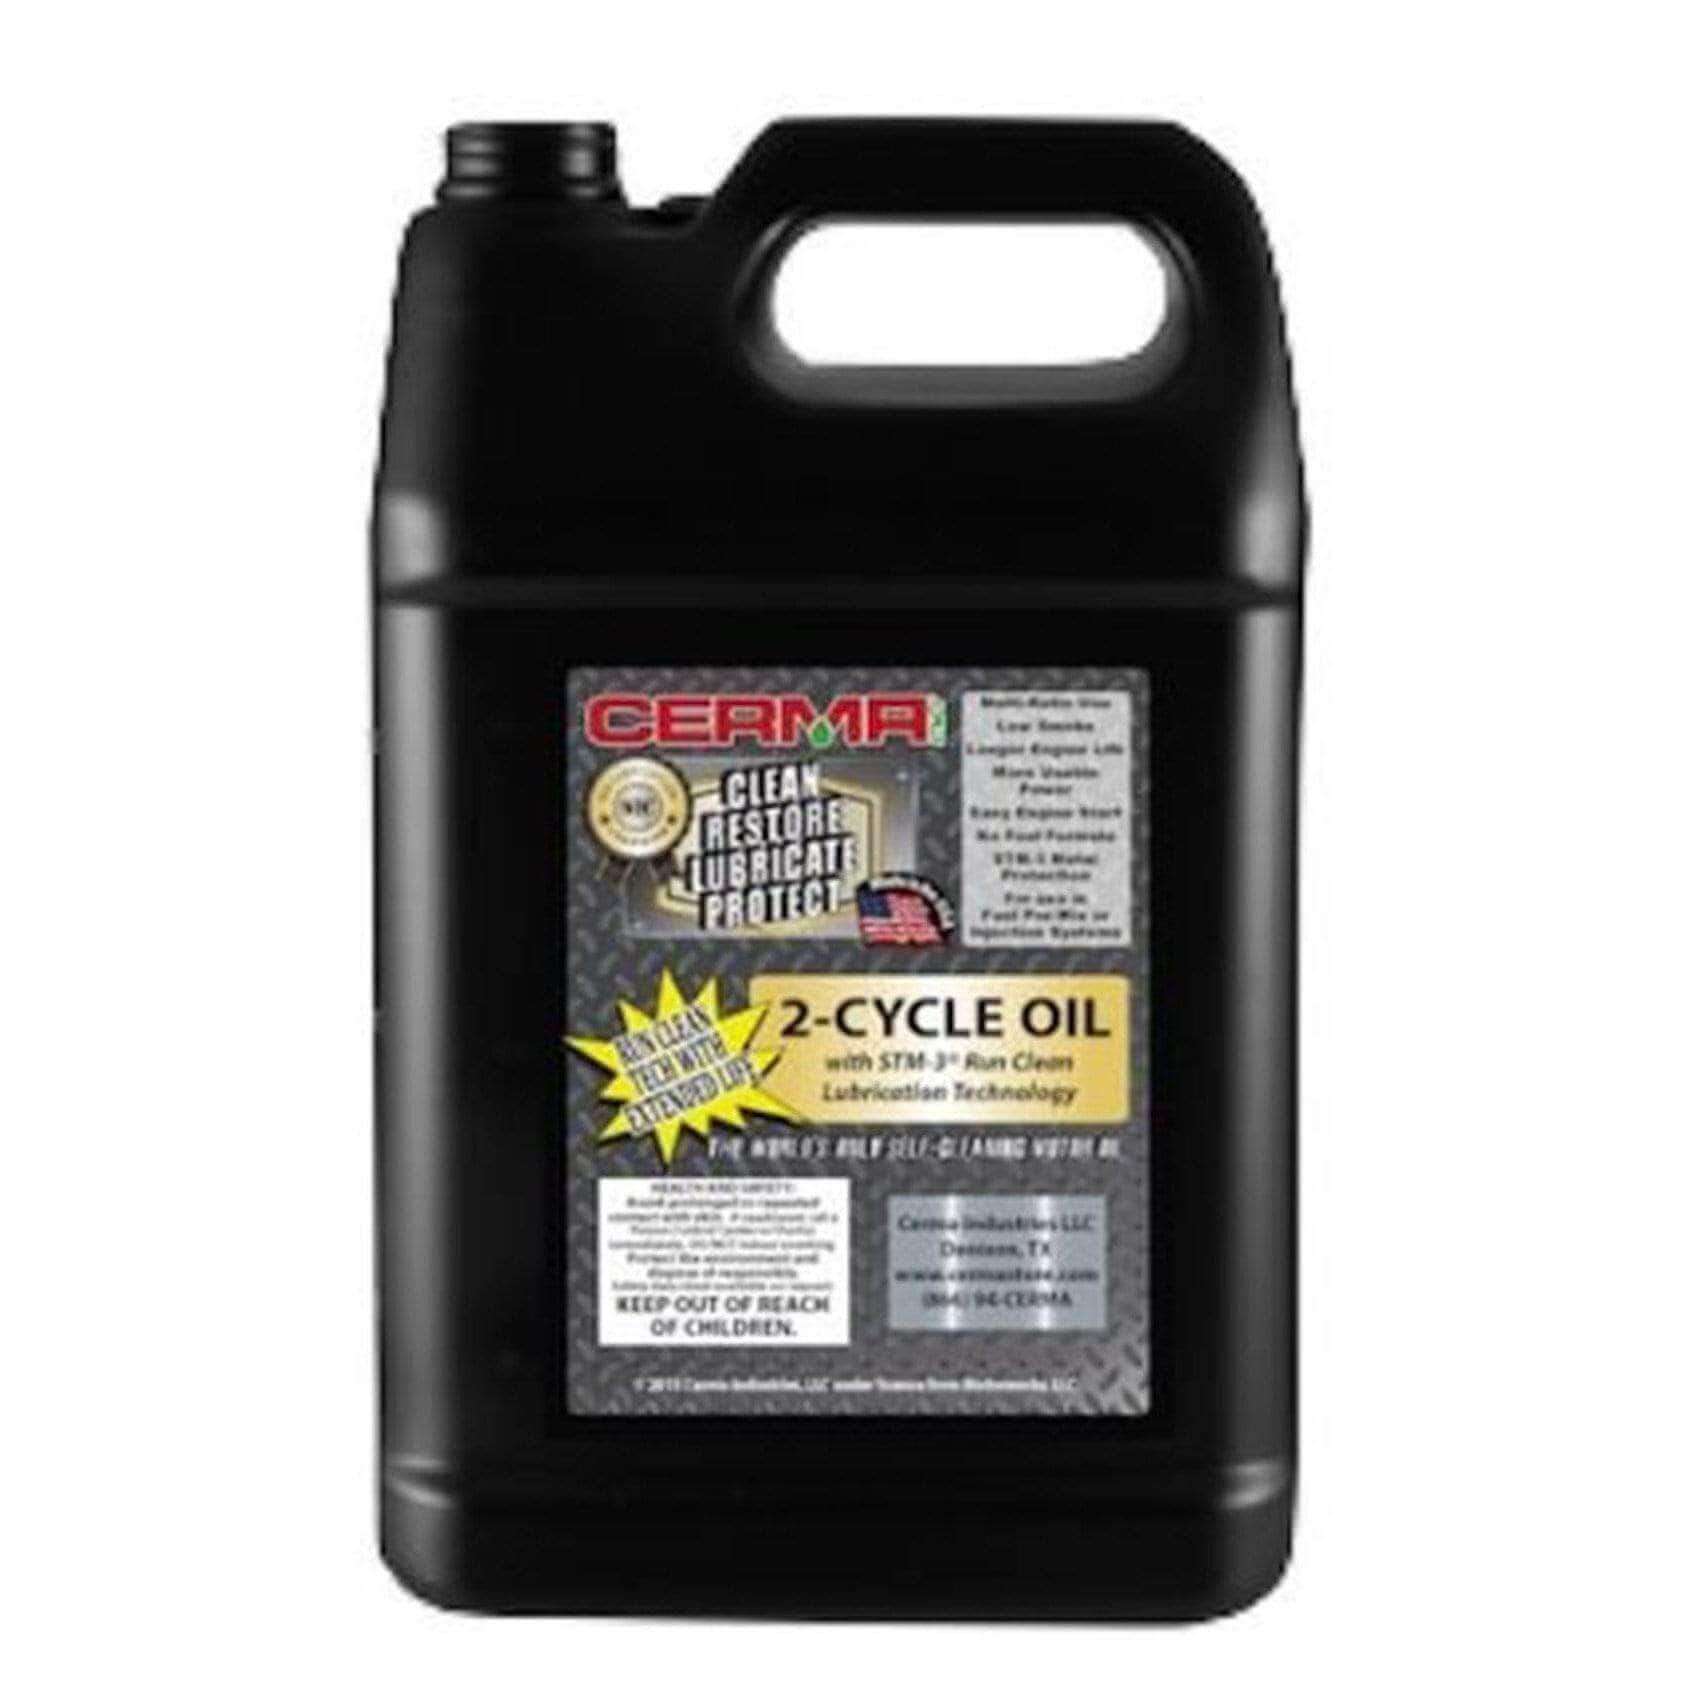 Cermax Ceramic 2-Cycle Multi-Ratio Oil at $68.99 only from cermatreatment.com